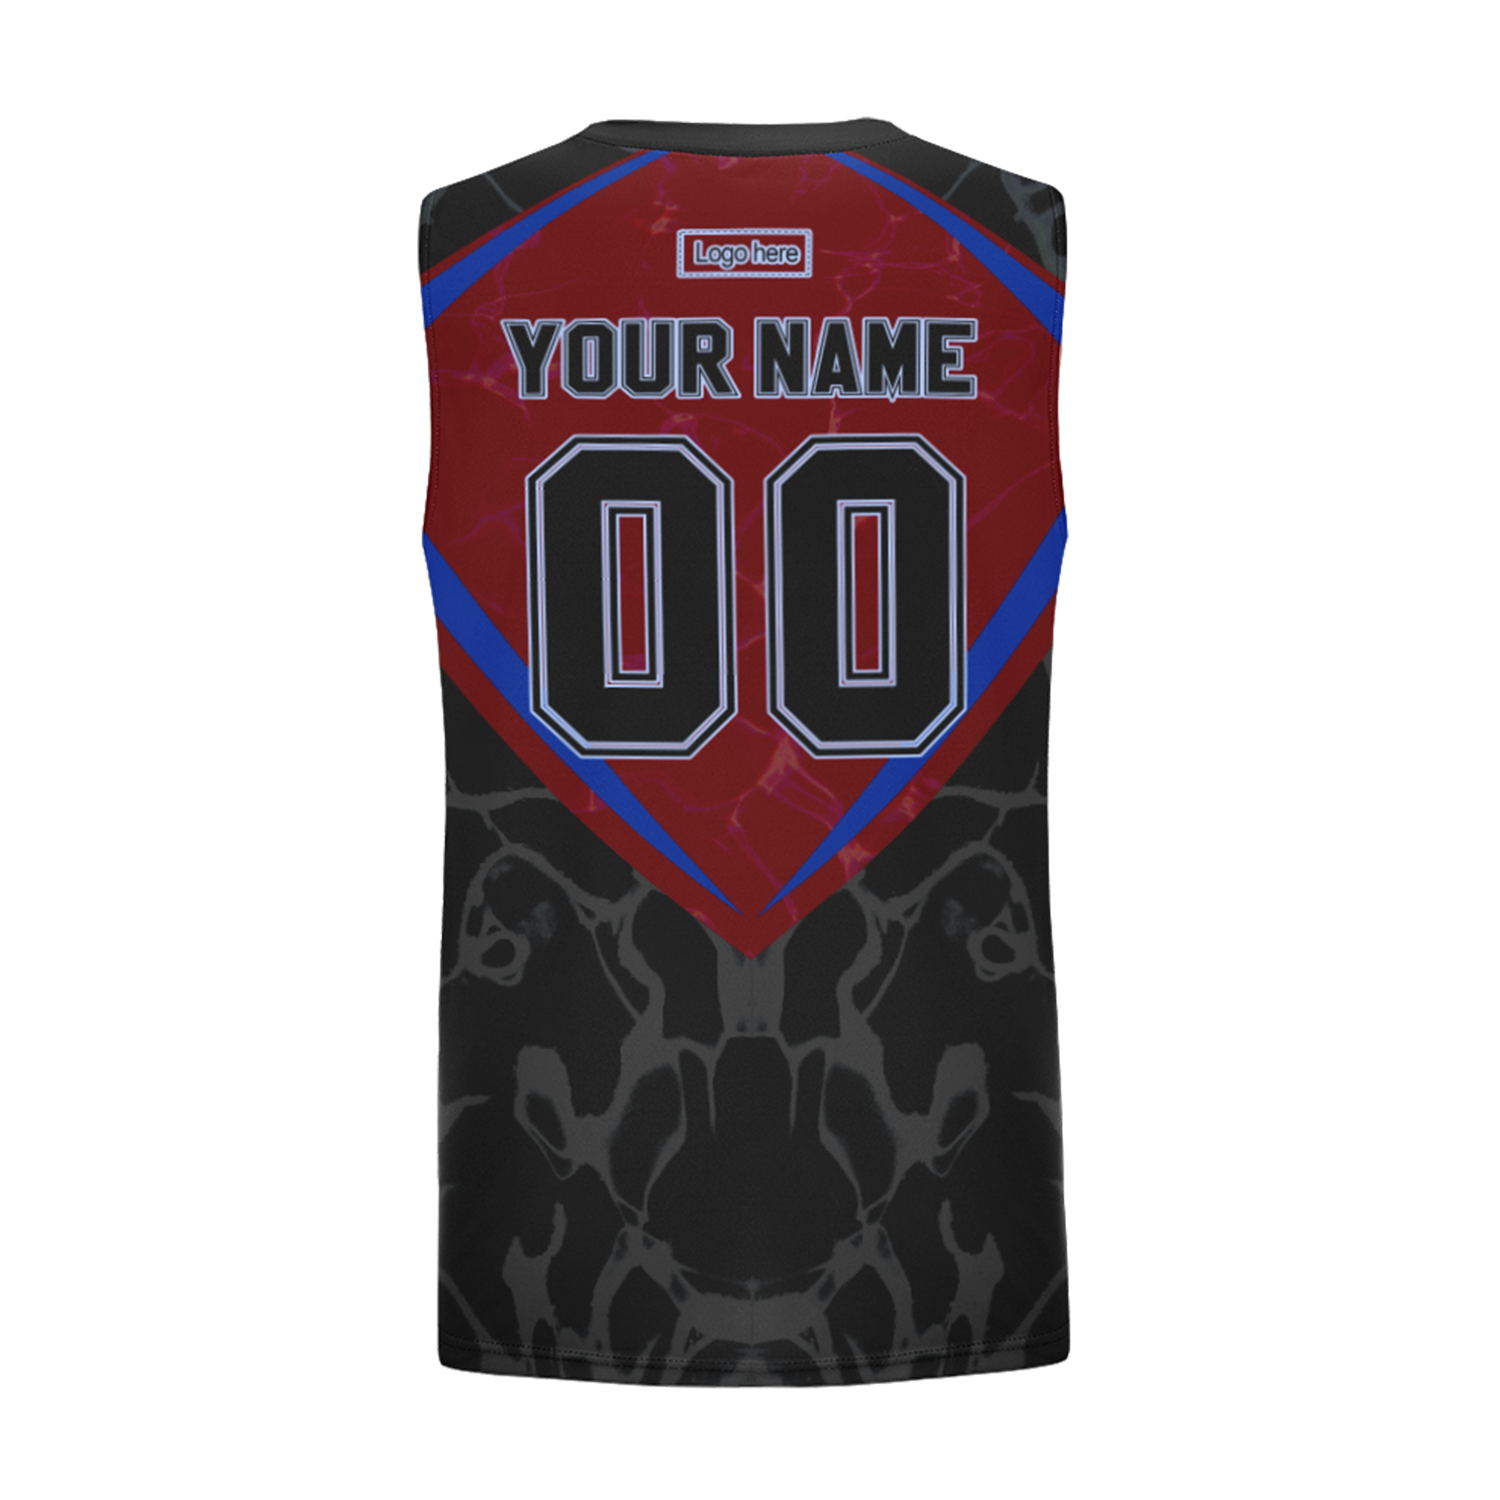 custom-basketball-jersey-personalized-printed-design-sports-basketball-uniforms-wholesale-team-basketball-suits-7